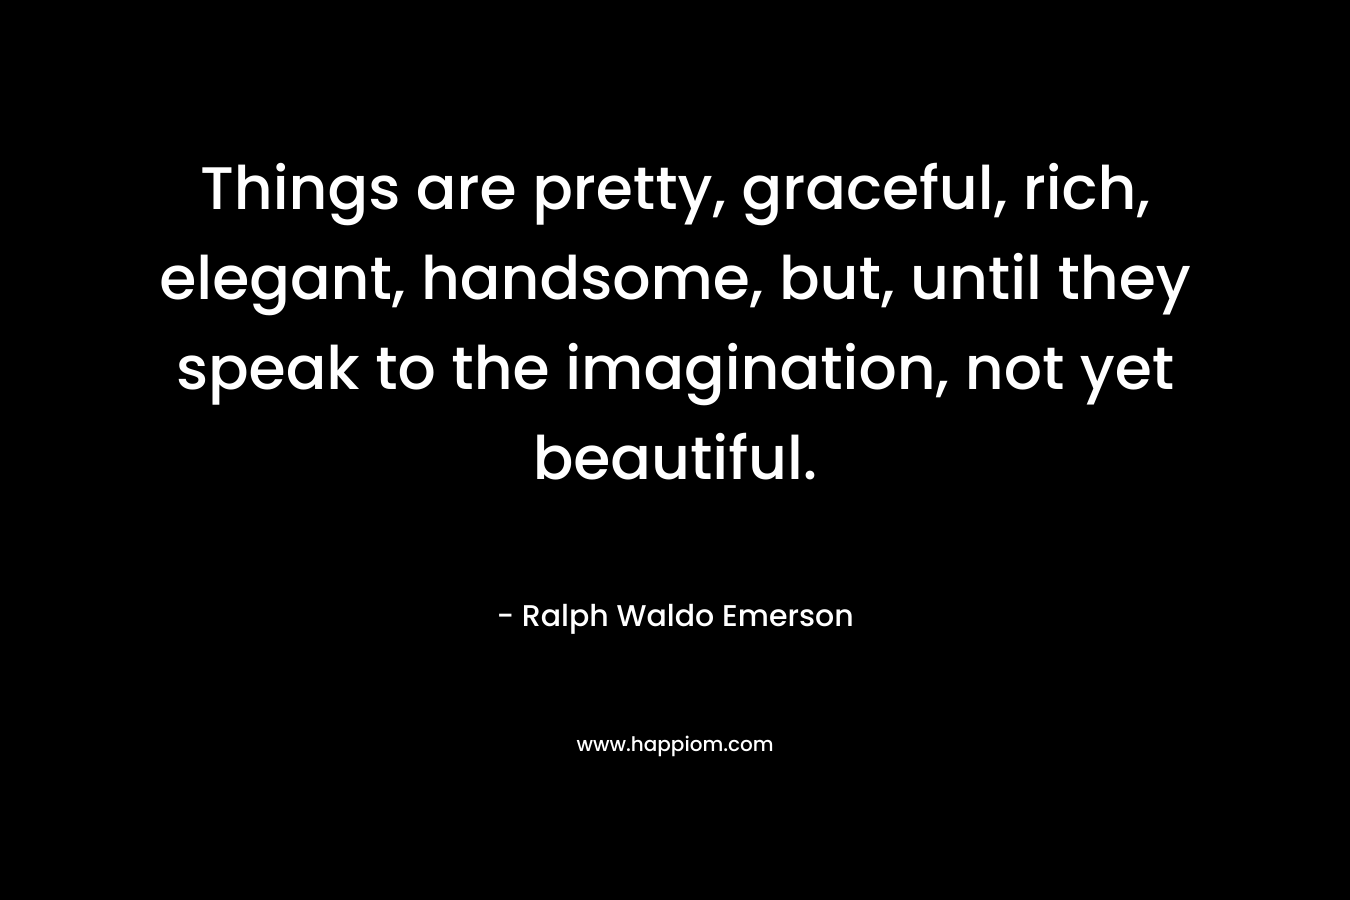 Things are pretty, graceful, rich, elegant, handsome, but, until they speak to the imagination, not yet beautiful.